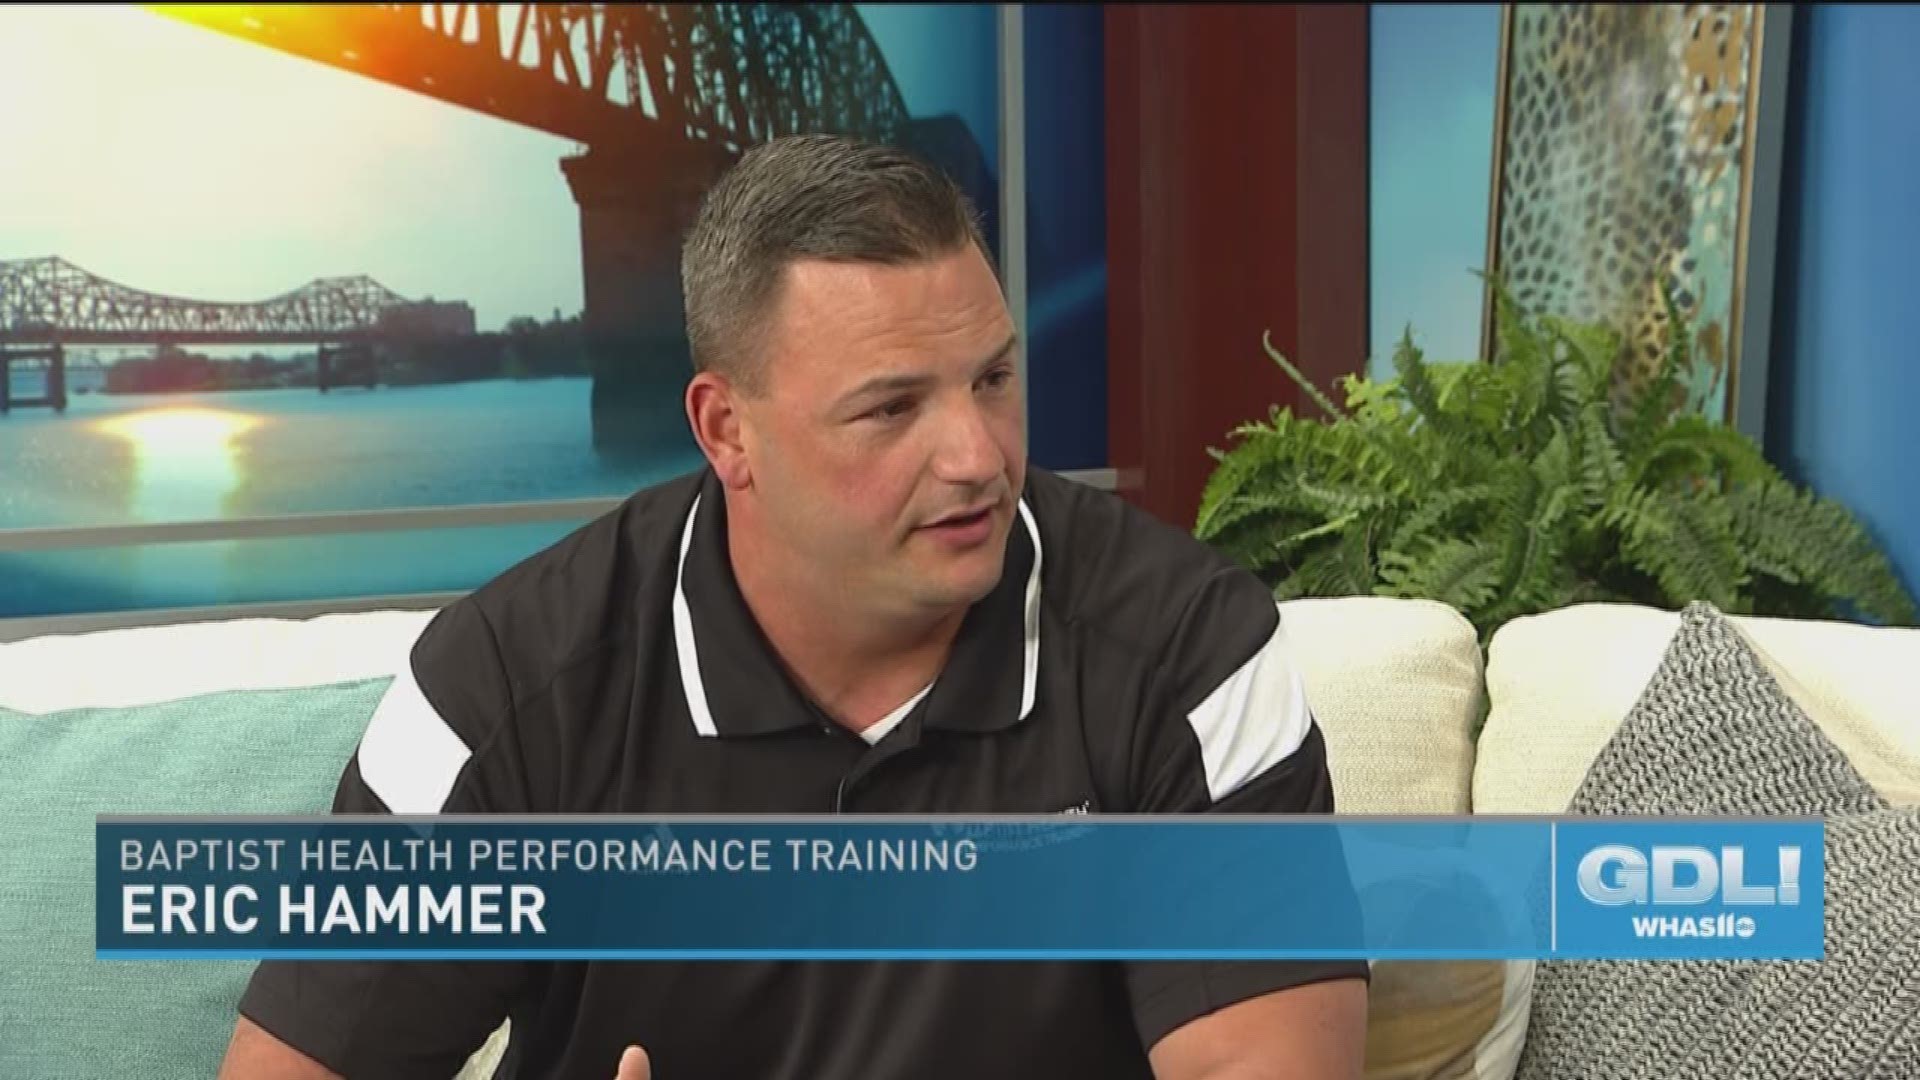 Coach Eric Hammer explains how Baptist Health offers a level of training you can't find at a local fitness center.